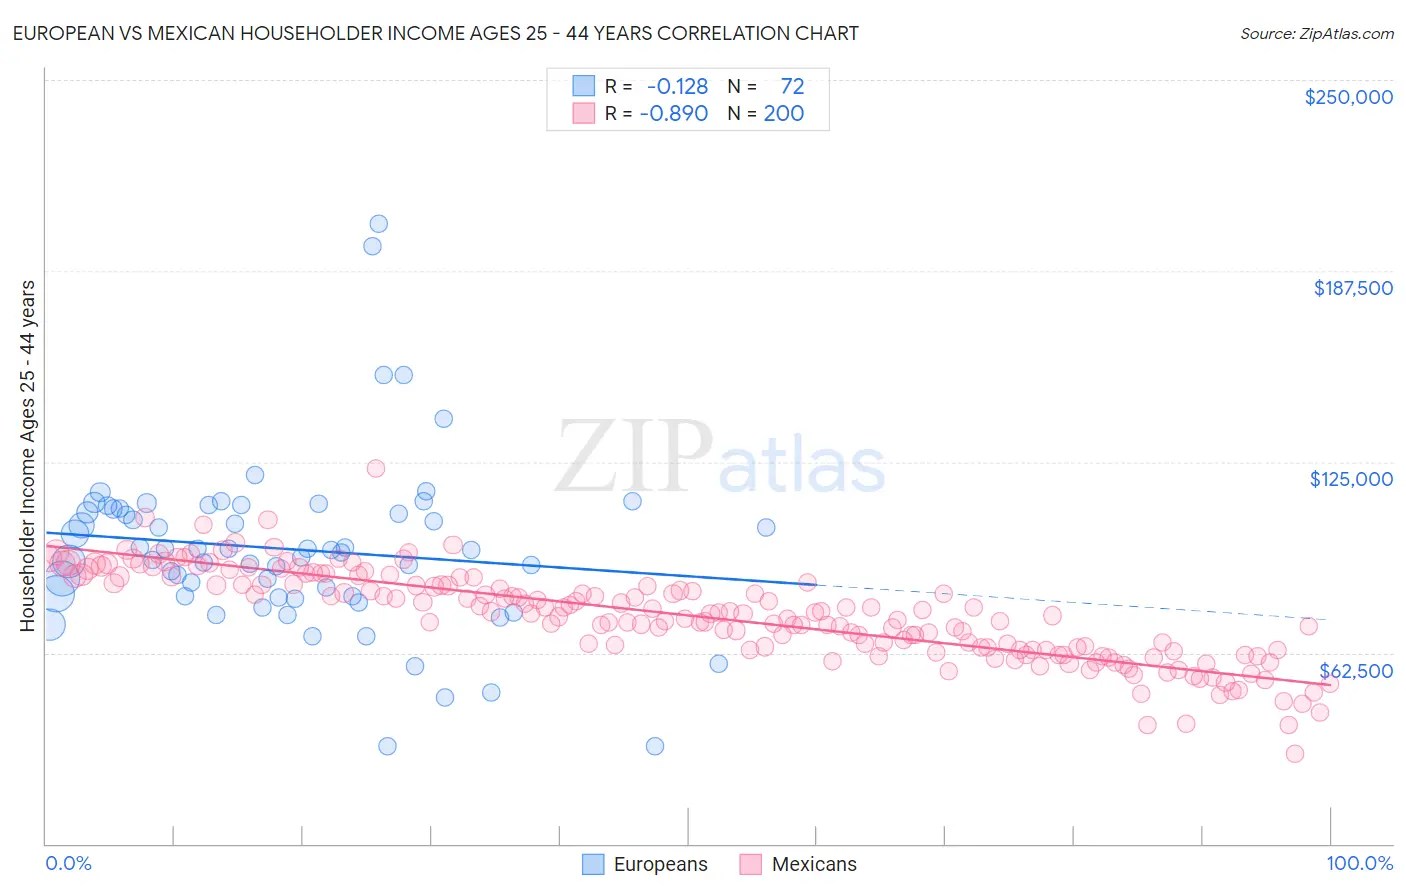 European vs Mexican Householder Income Ages 25 - 44 years